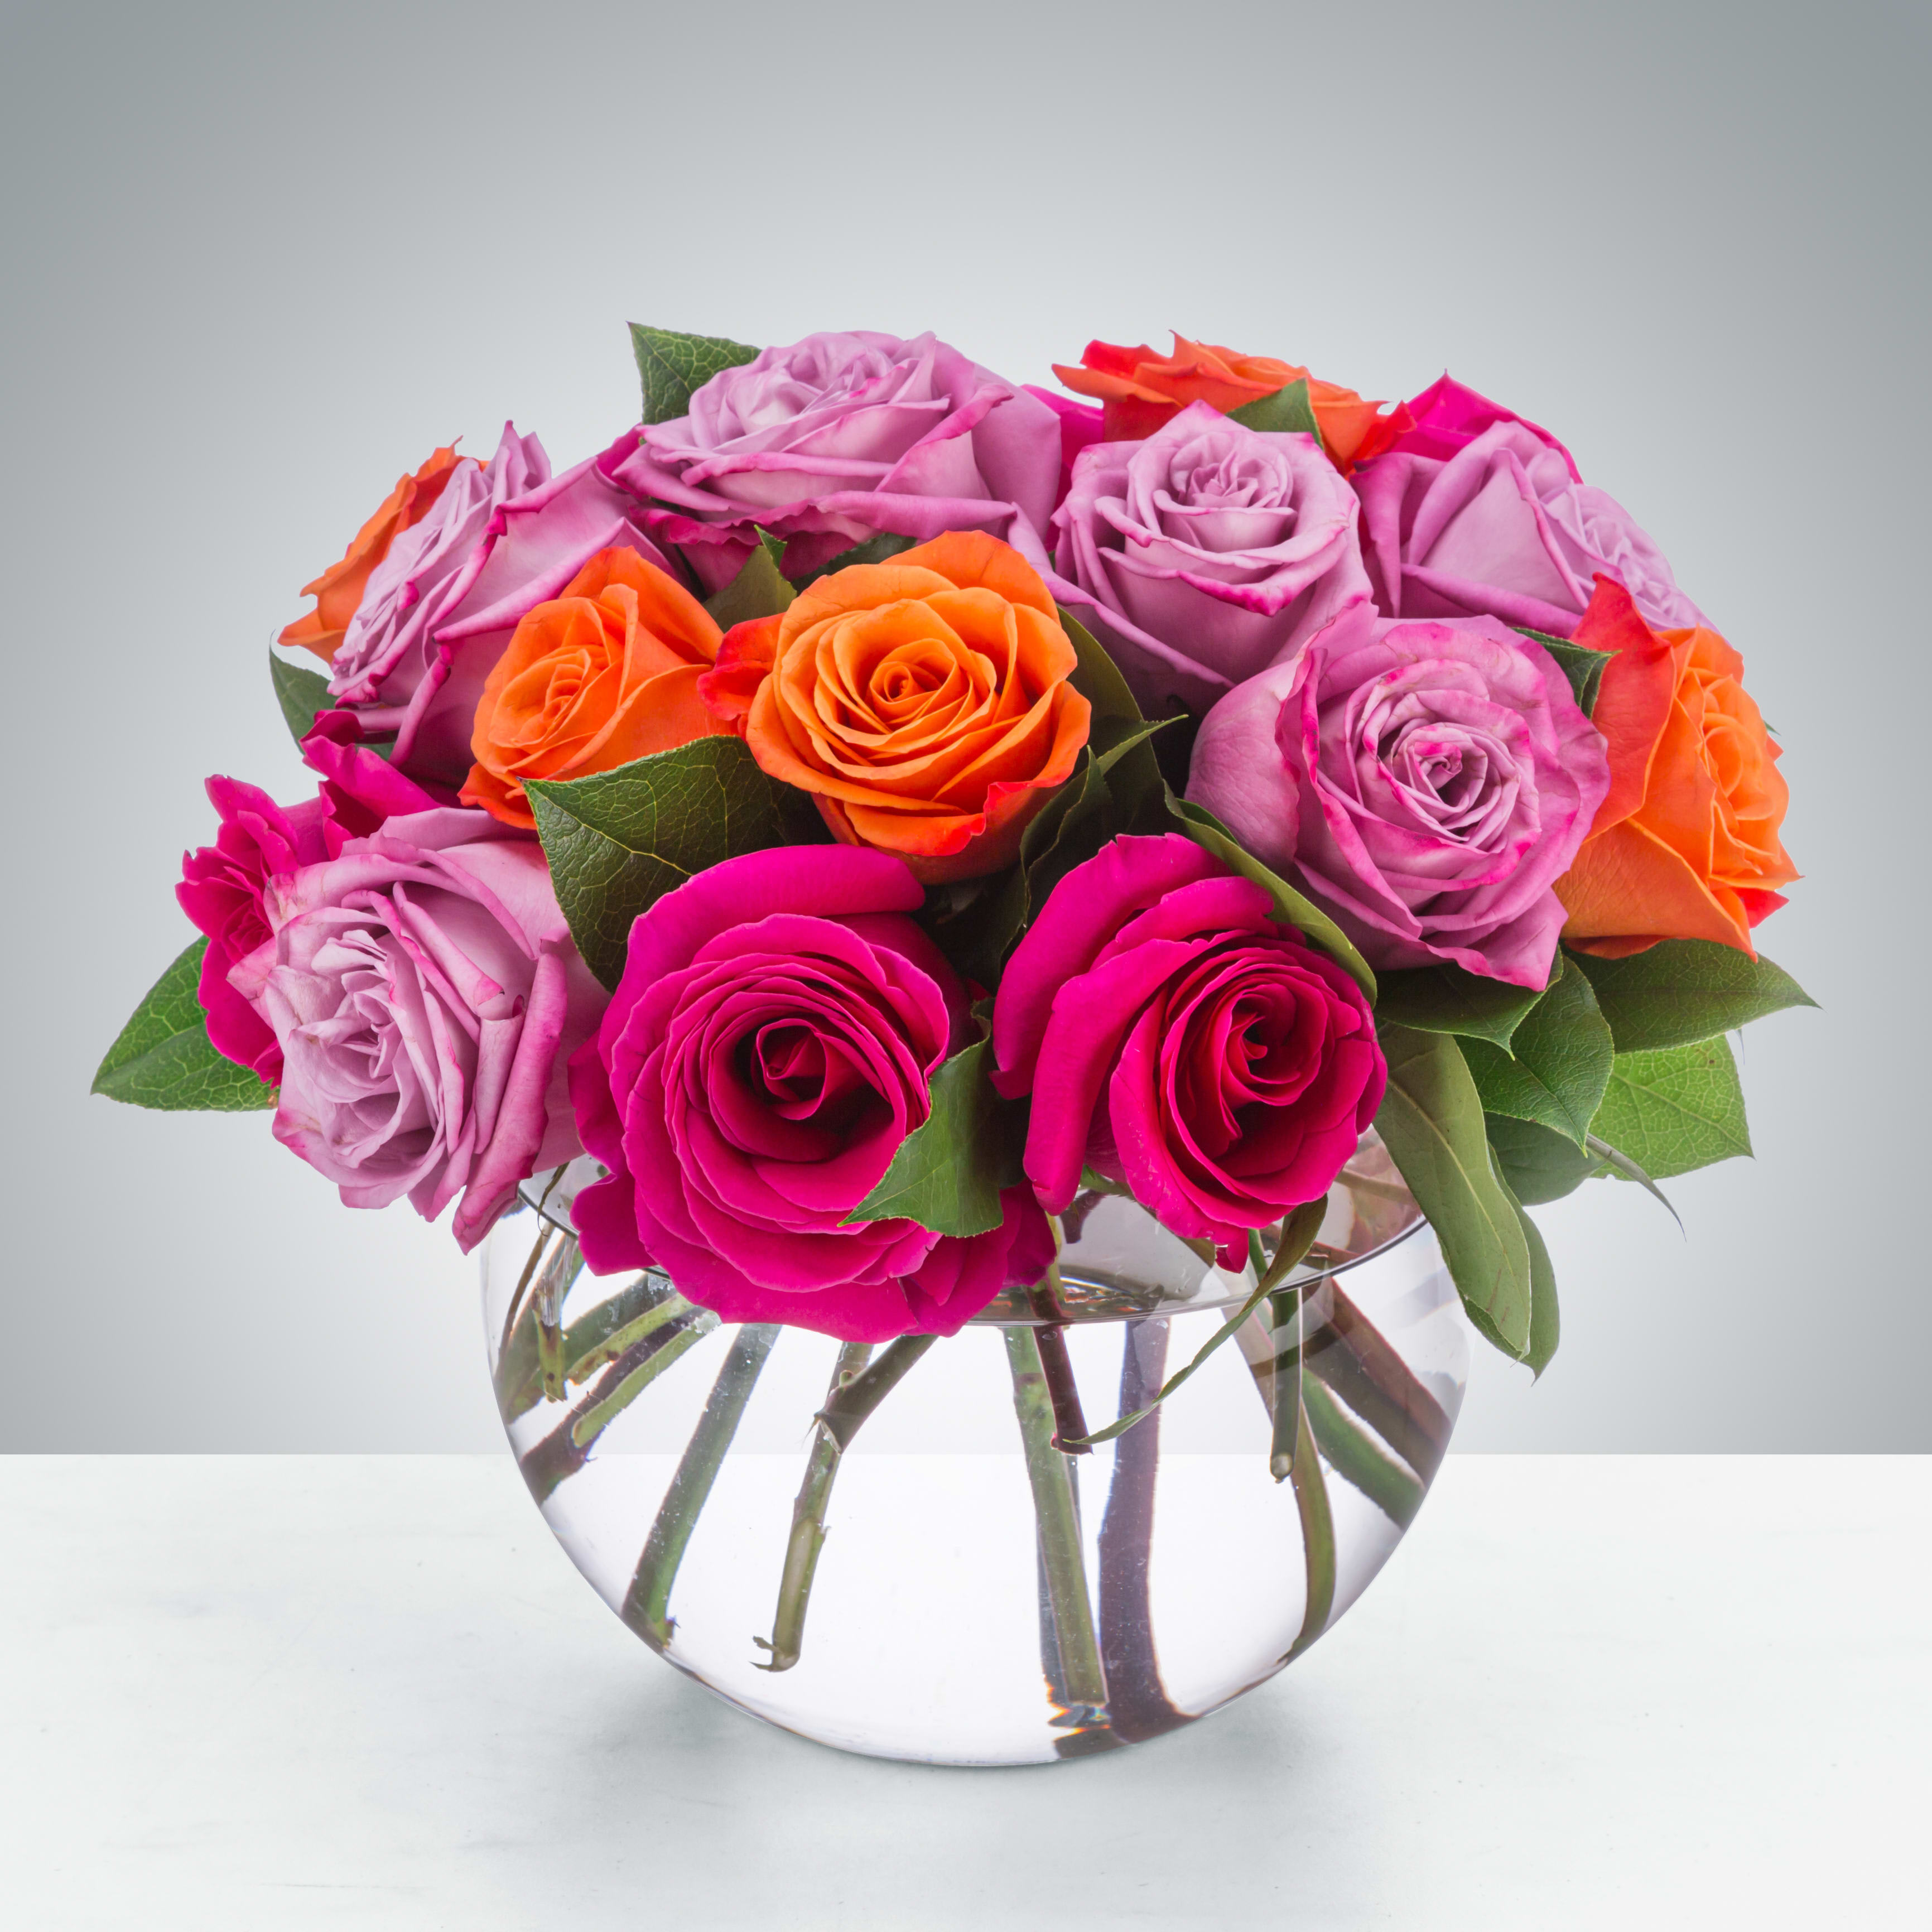 Daybreak by BloomNation™ - A lovely bowl of colorful roses brightens and lifts any room (and relationship!) A great gift for sending on Valentine's Day to your significant other, your friend, or even your mom!  Approximate Dimensions: 11''D x 11''H  COLOR OF ROSES WILL VARY 